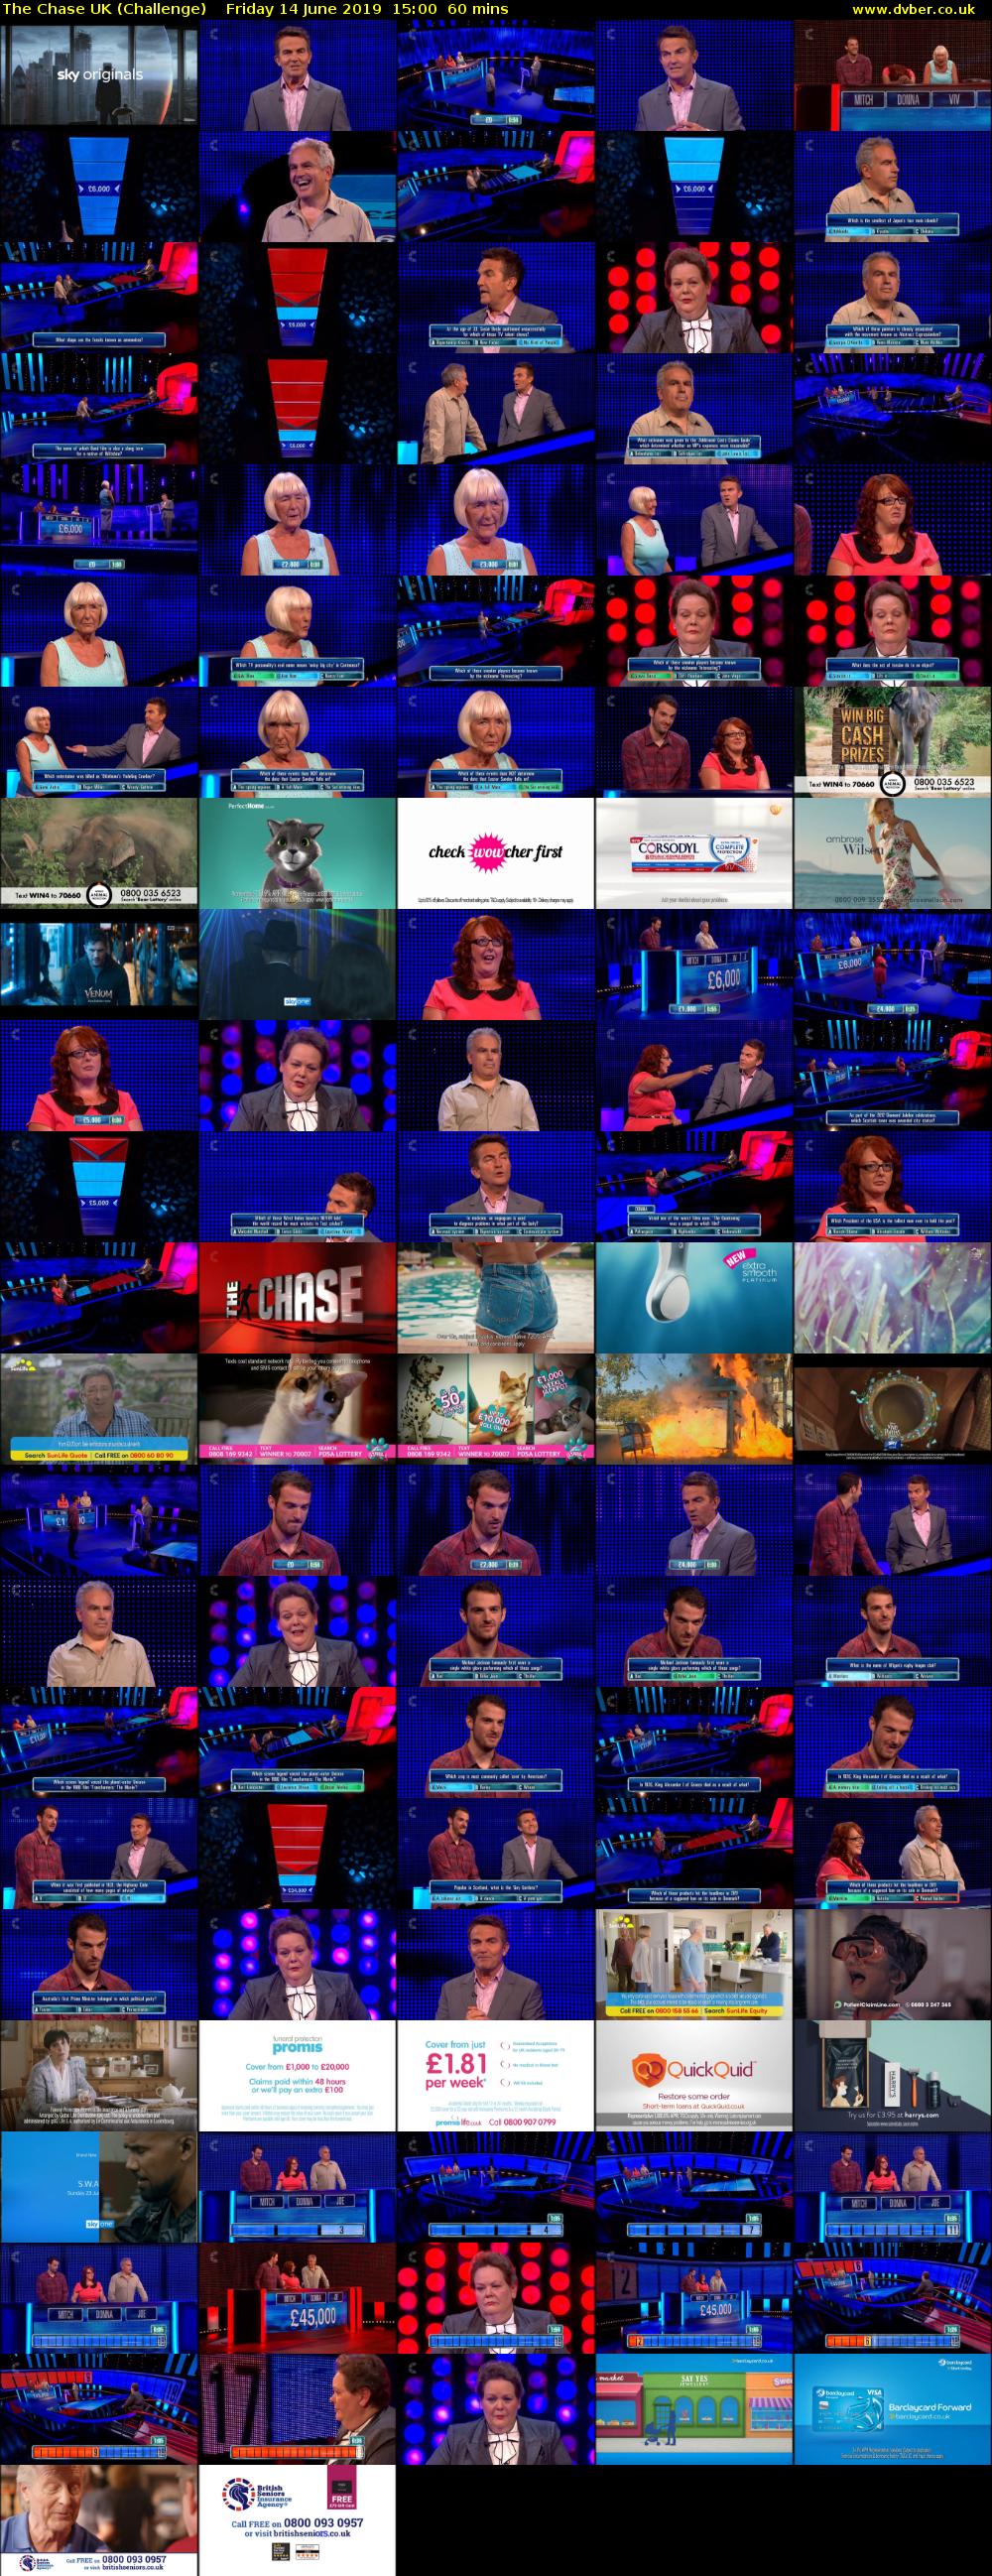 The Chase UK (Challenge) Friday 14 June 2019 15:00 - 16:00